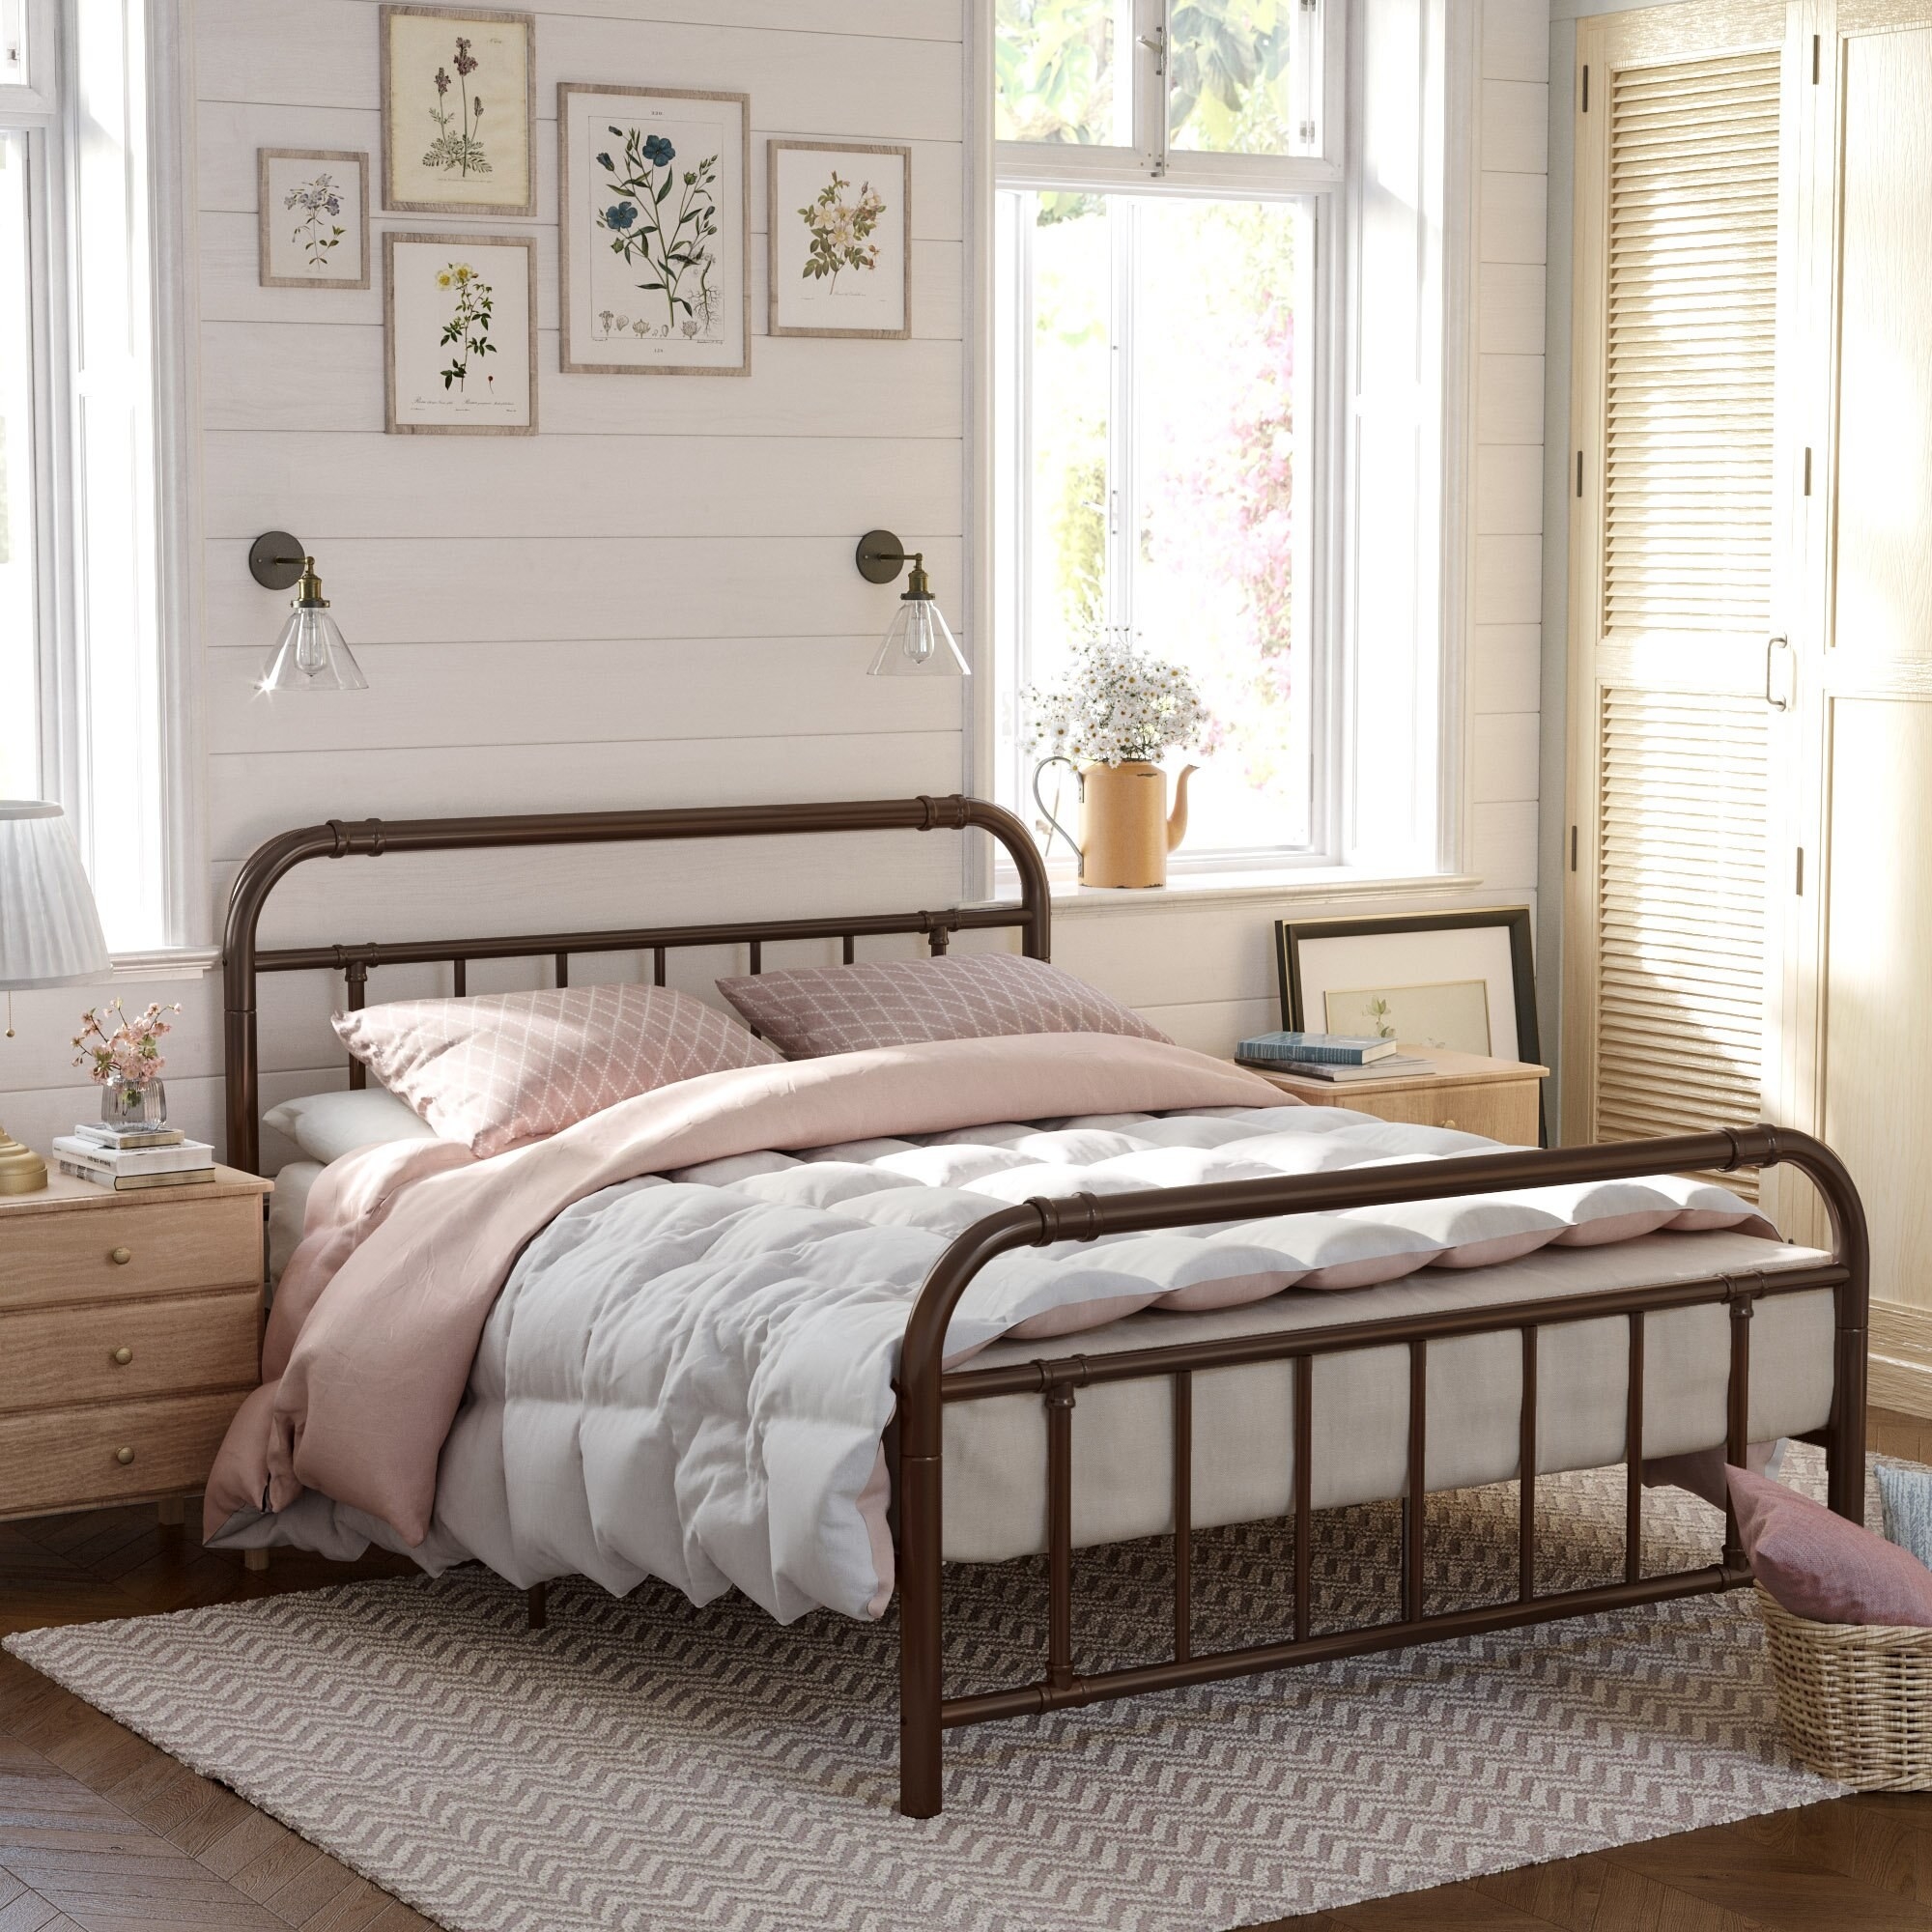 27 Bed Frames That Only Look, Nice Bed Frames